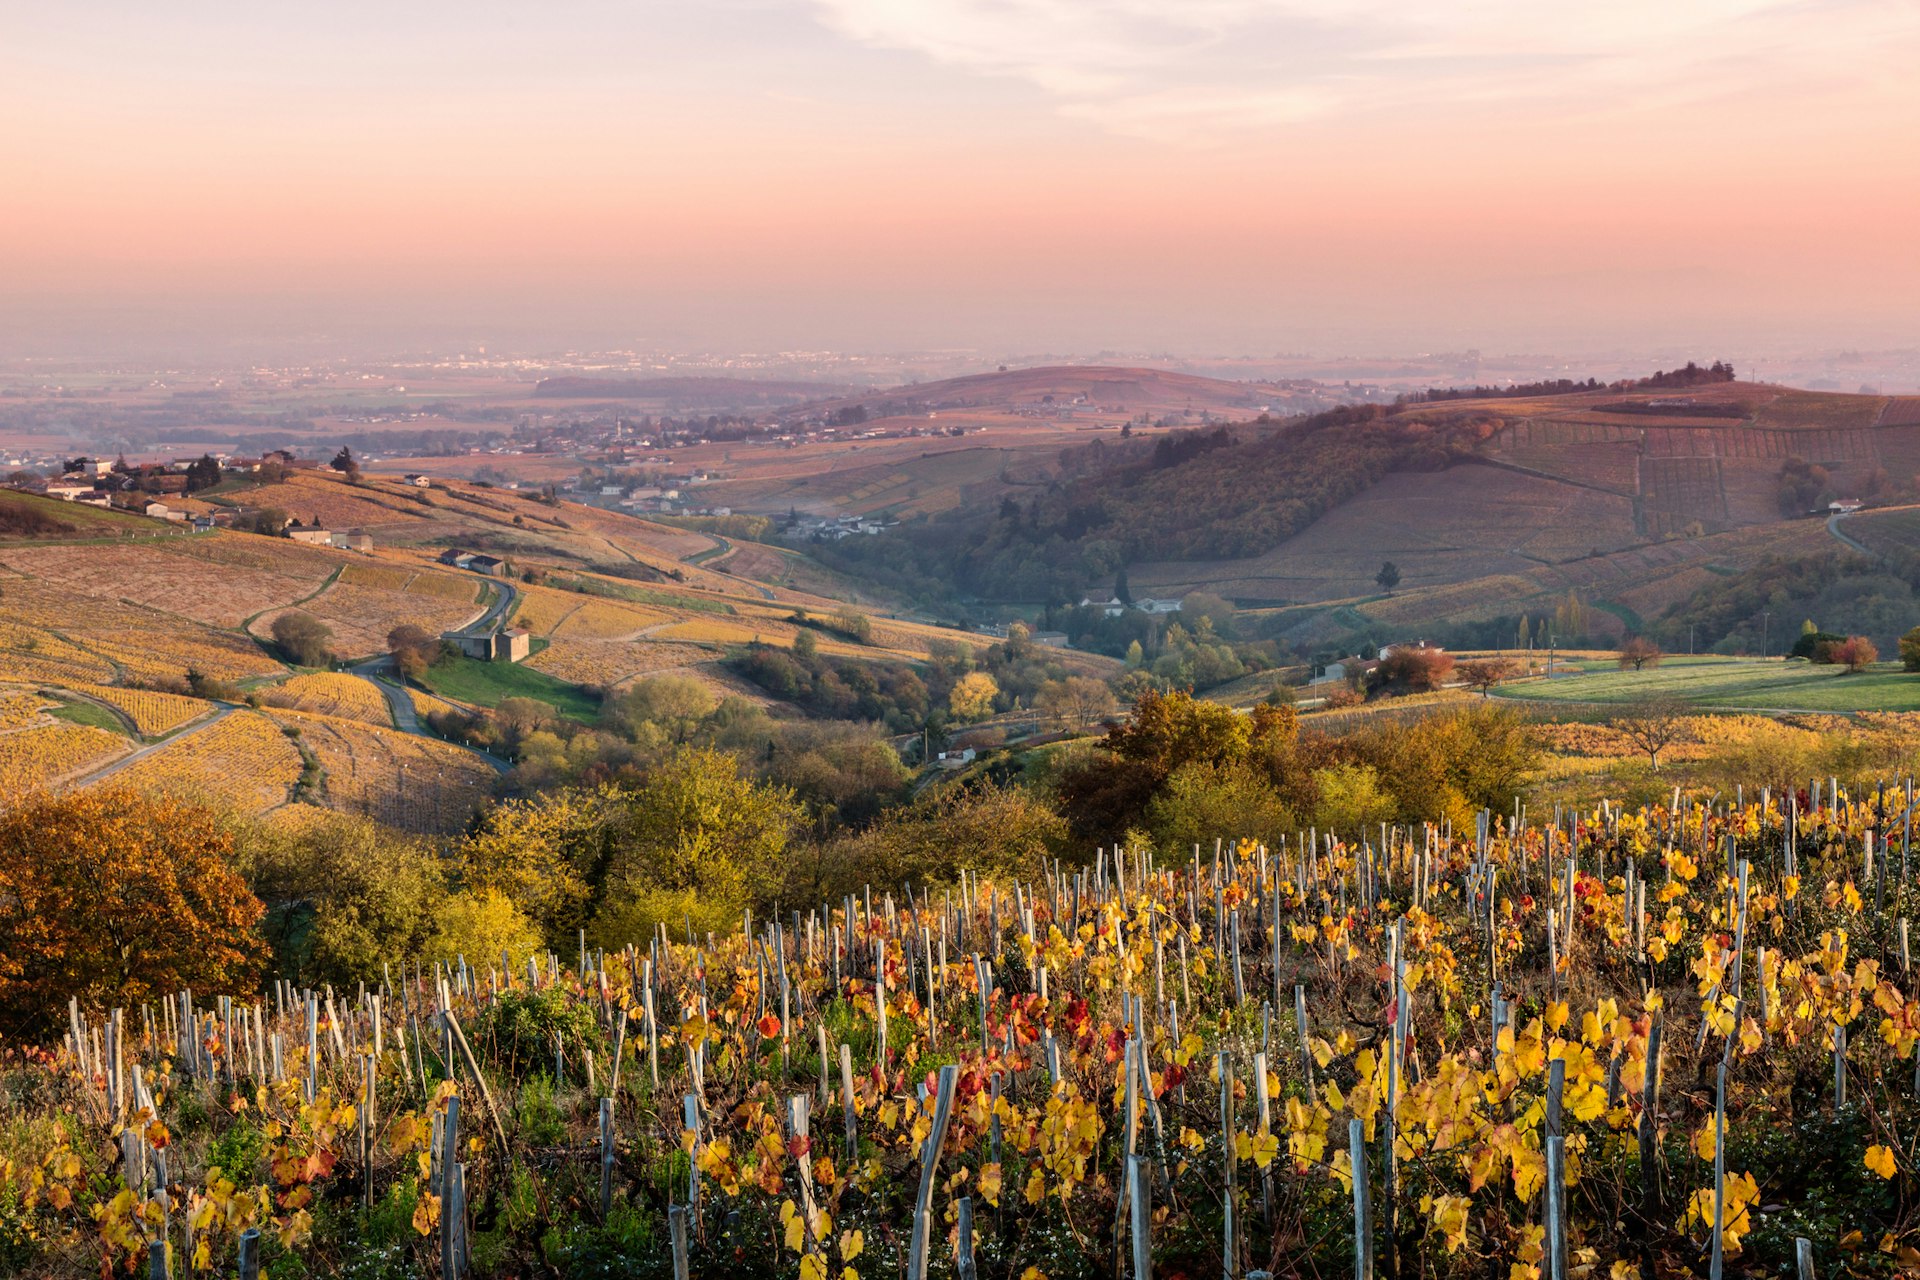 Rolling hills covered in vines at sunset